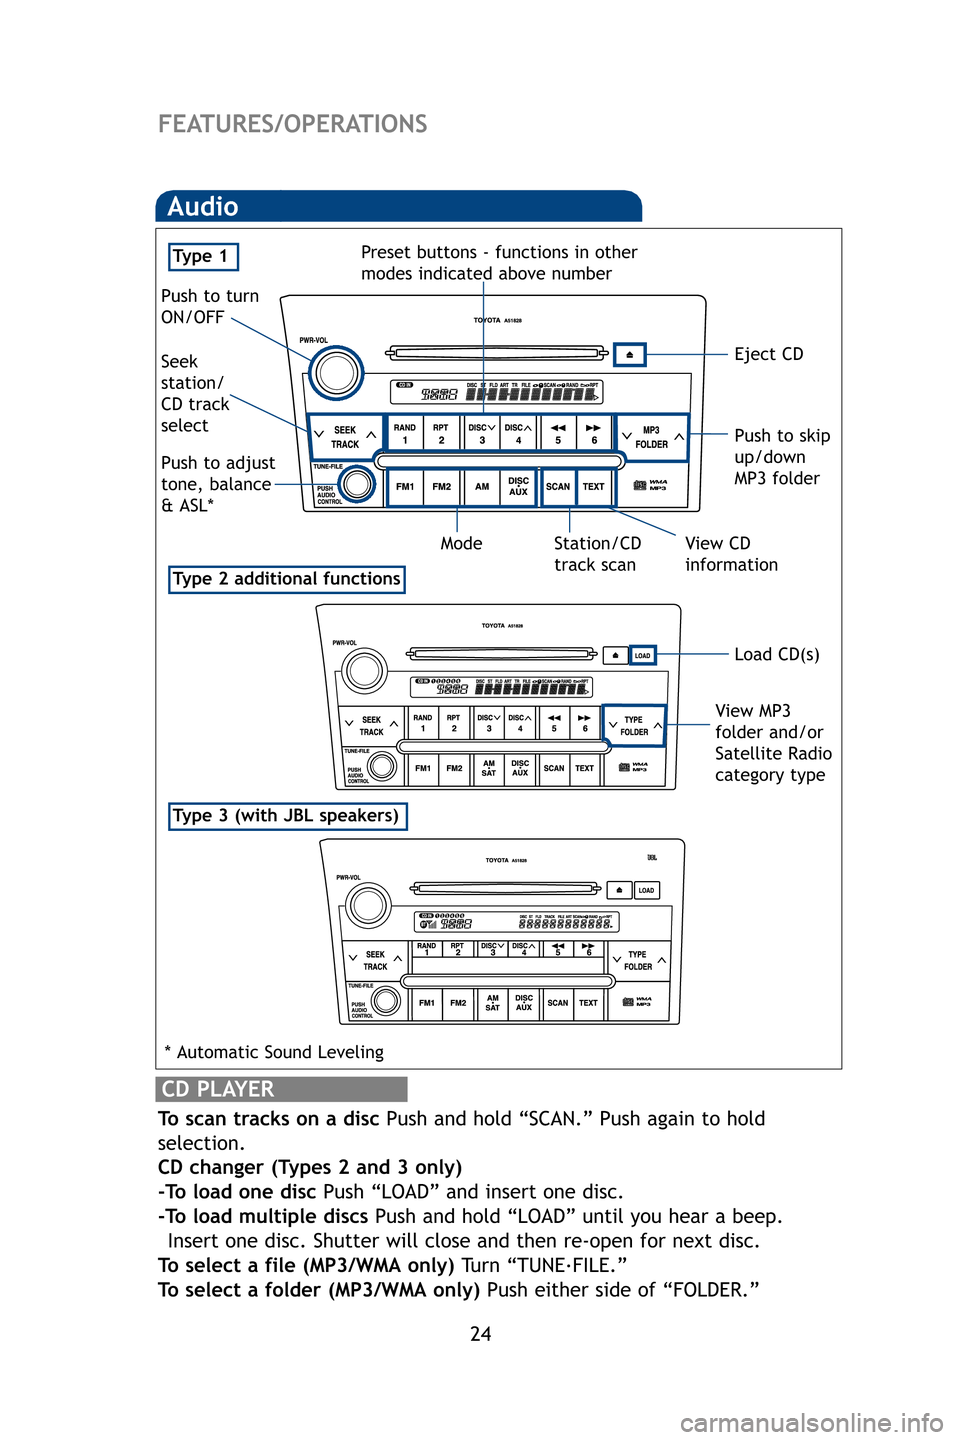 TOYOTA SEQUOIA 2009 2.G Quick Reference Guide 24
FEATURES/OPERATIONS
Audio
Type 2 additional functions
Type 3 (with JBL speakers)
Eject CD
Push to turn
ON/OFF
View CD
information
Push to adjust
tone, balance
& ASL* Seek
station/
CD track
select
S